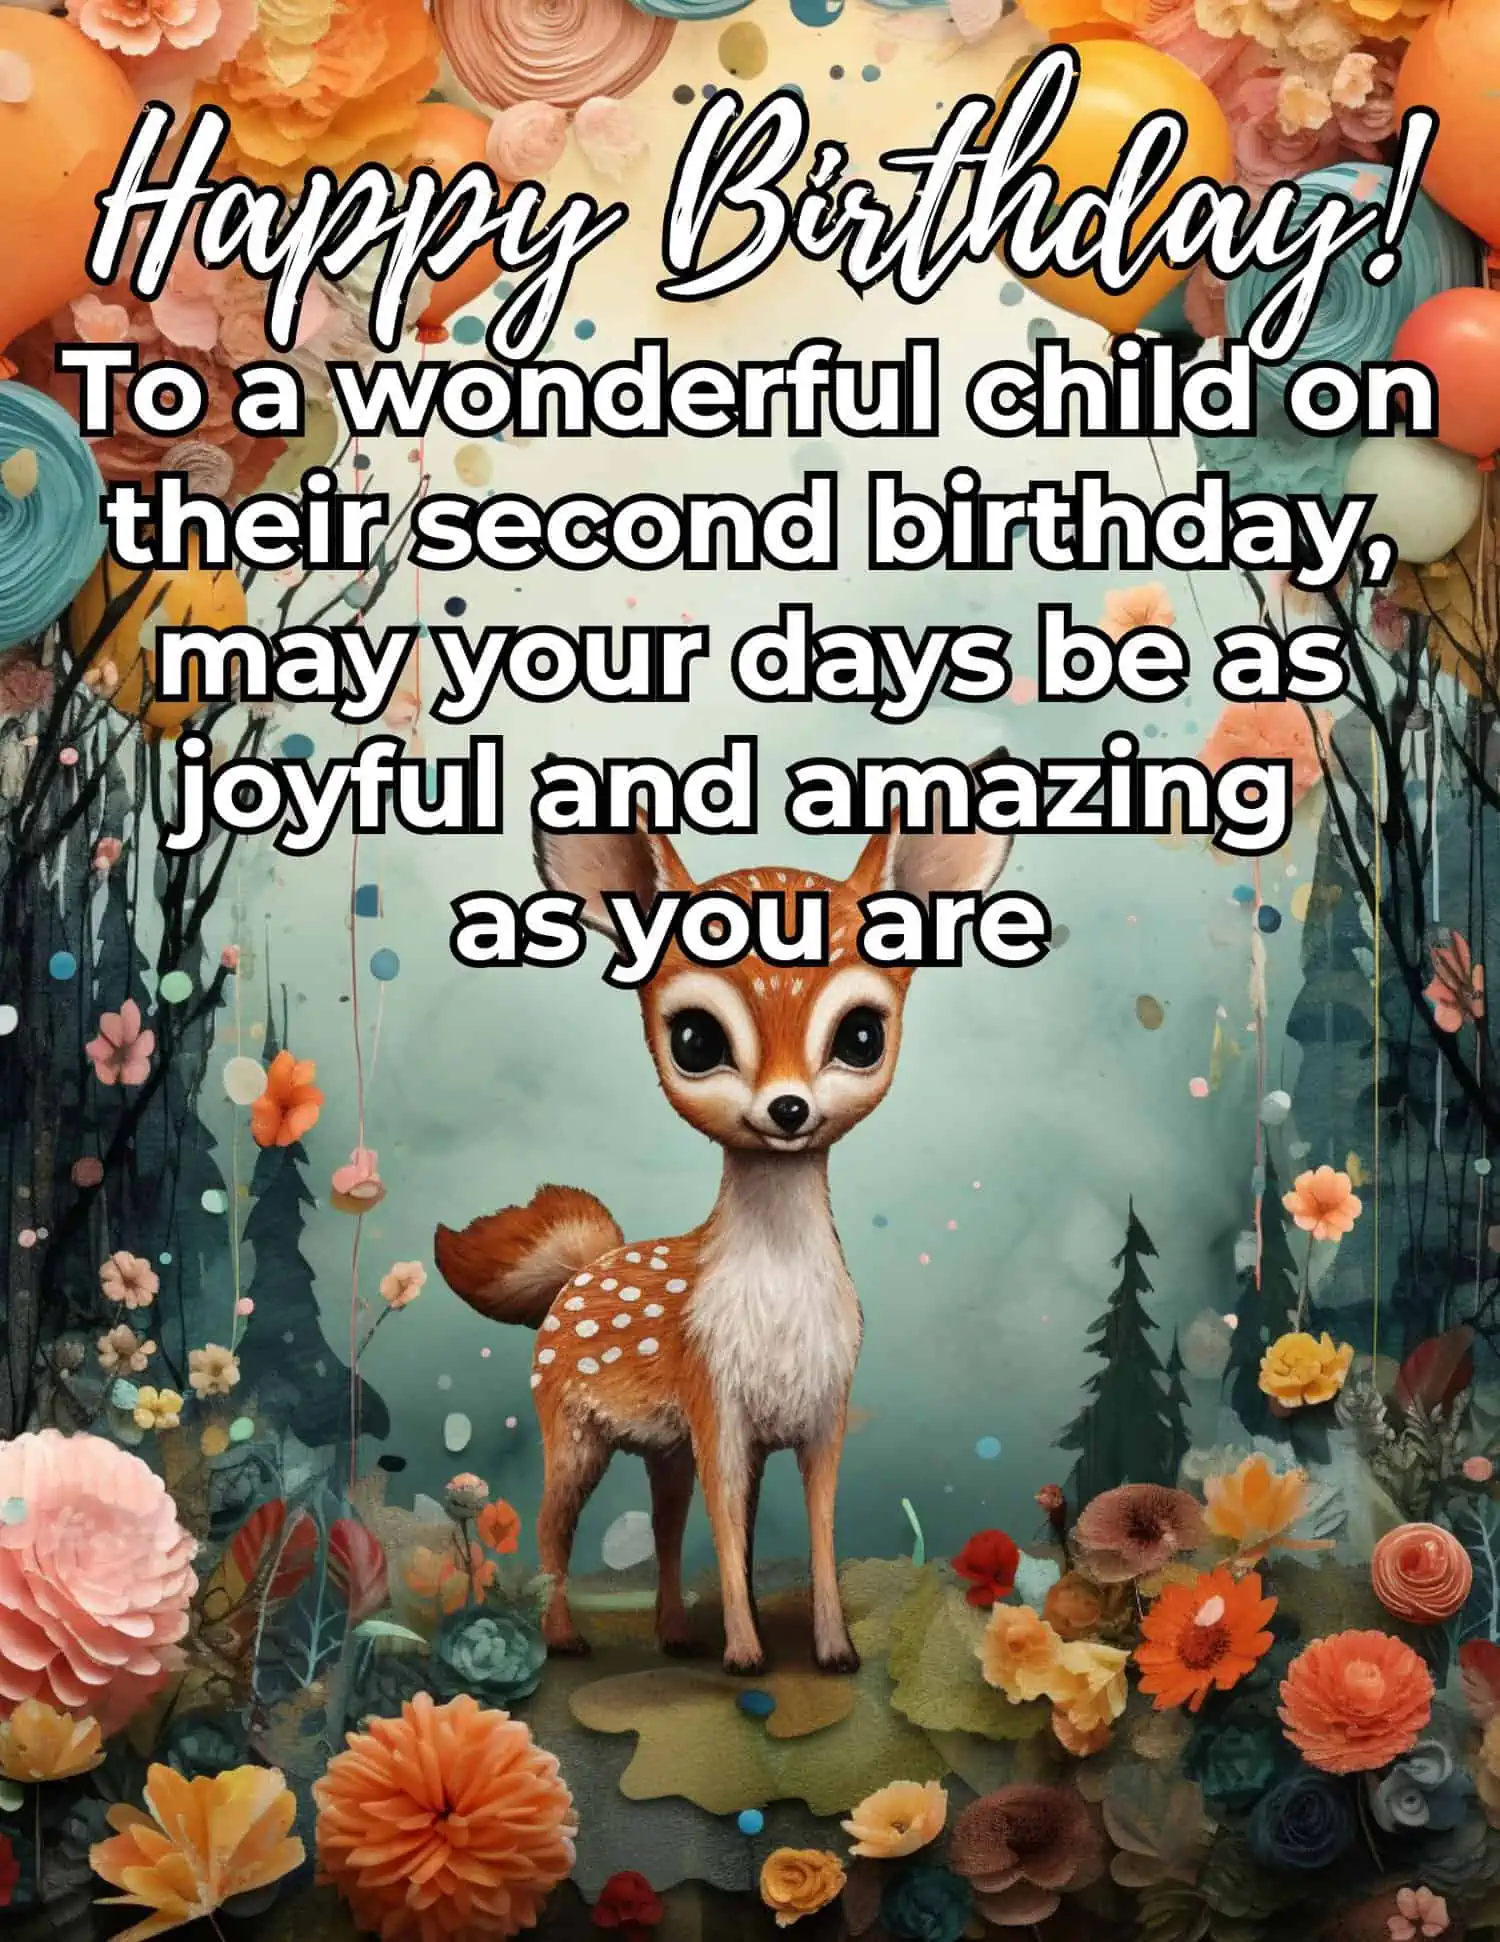 Deeply moving and heartfelt birthday messages that touch the heart on a child's second birthday.